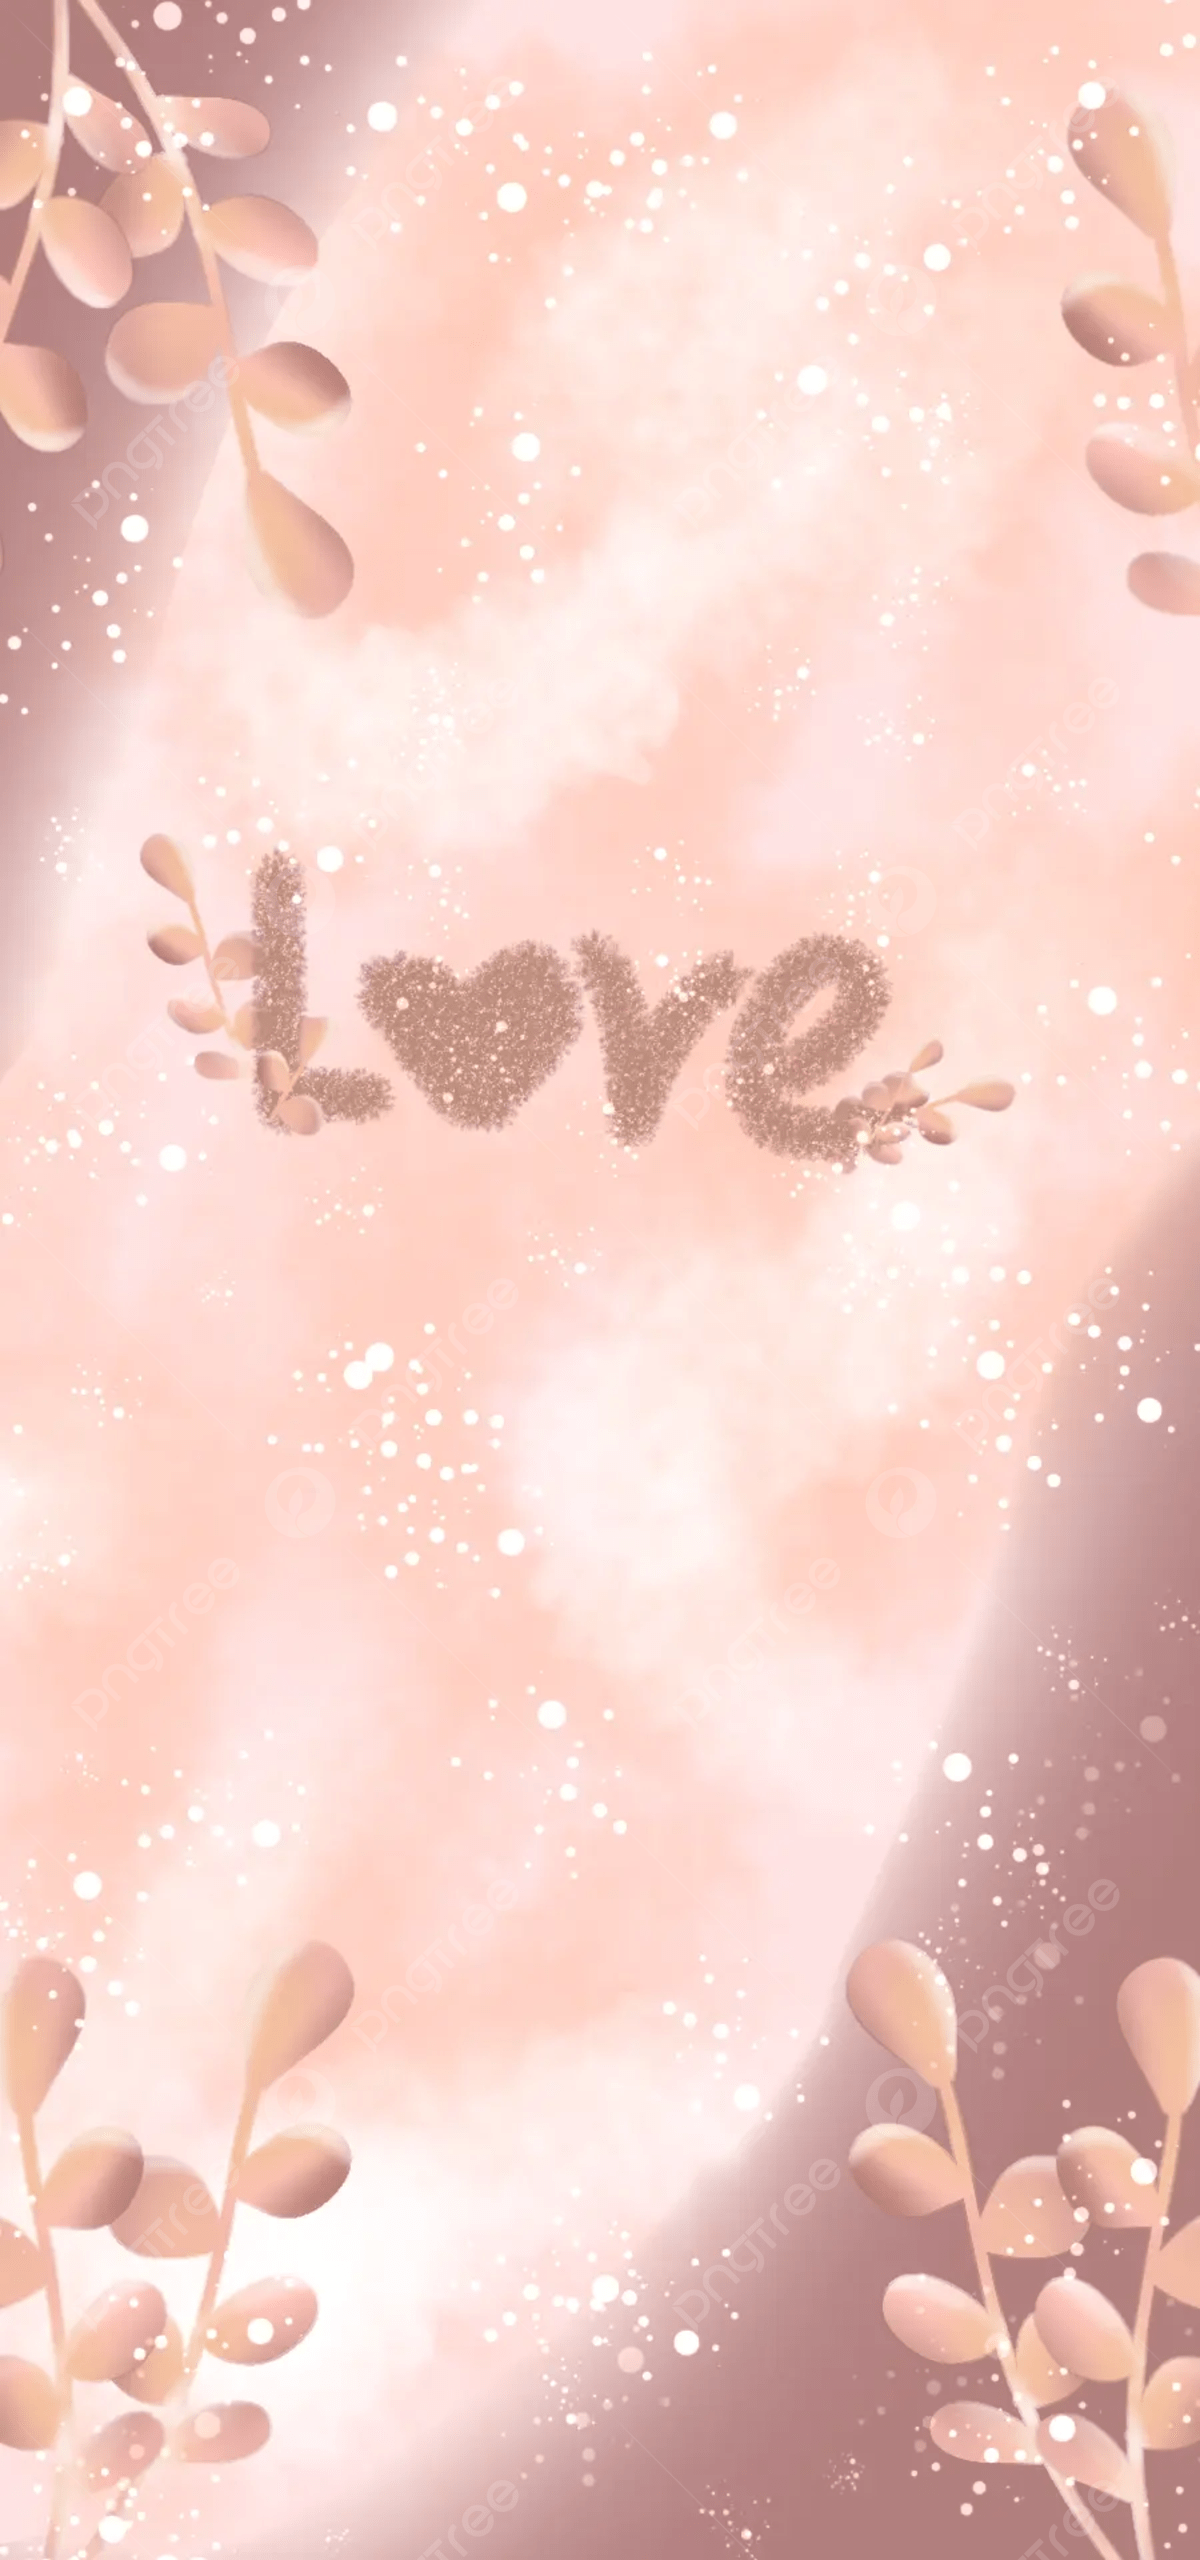 Aesthetic Background With Love Lettering Wallpaper Image For Free Download